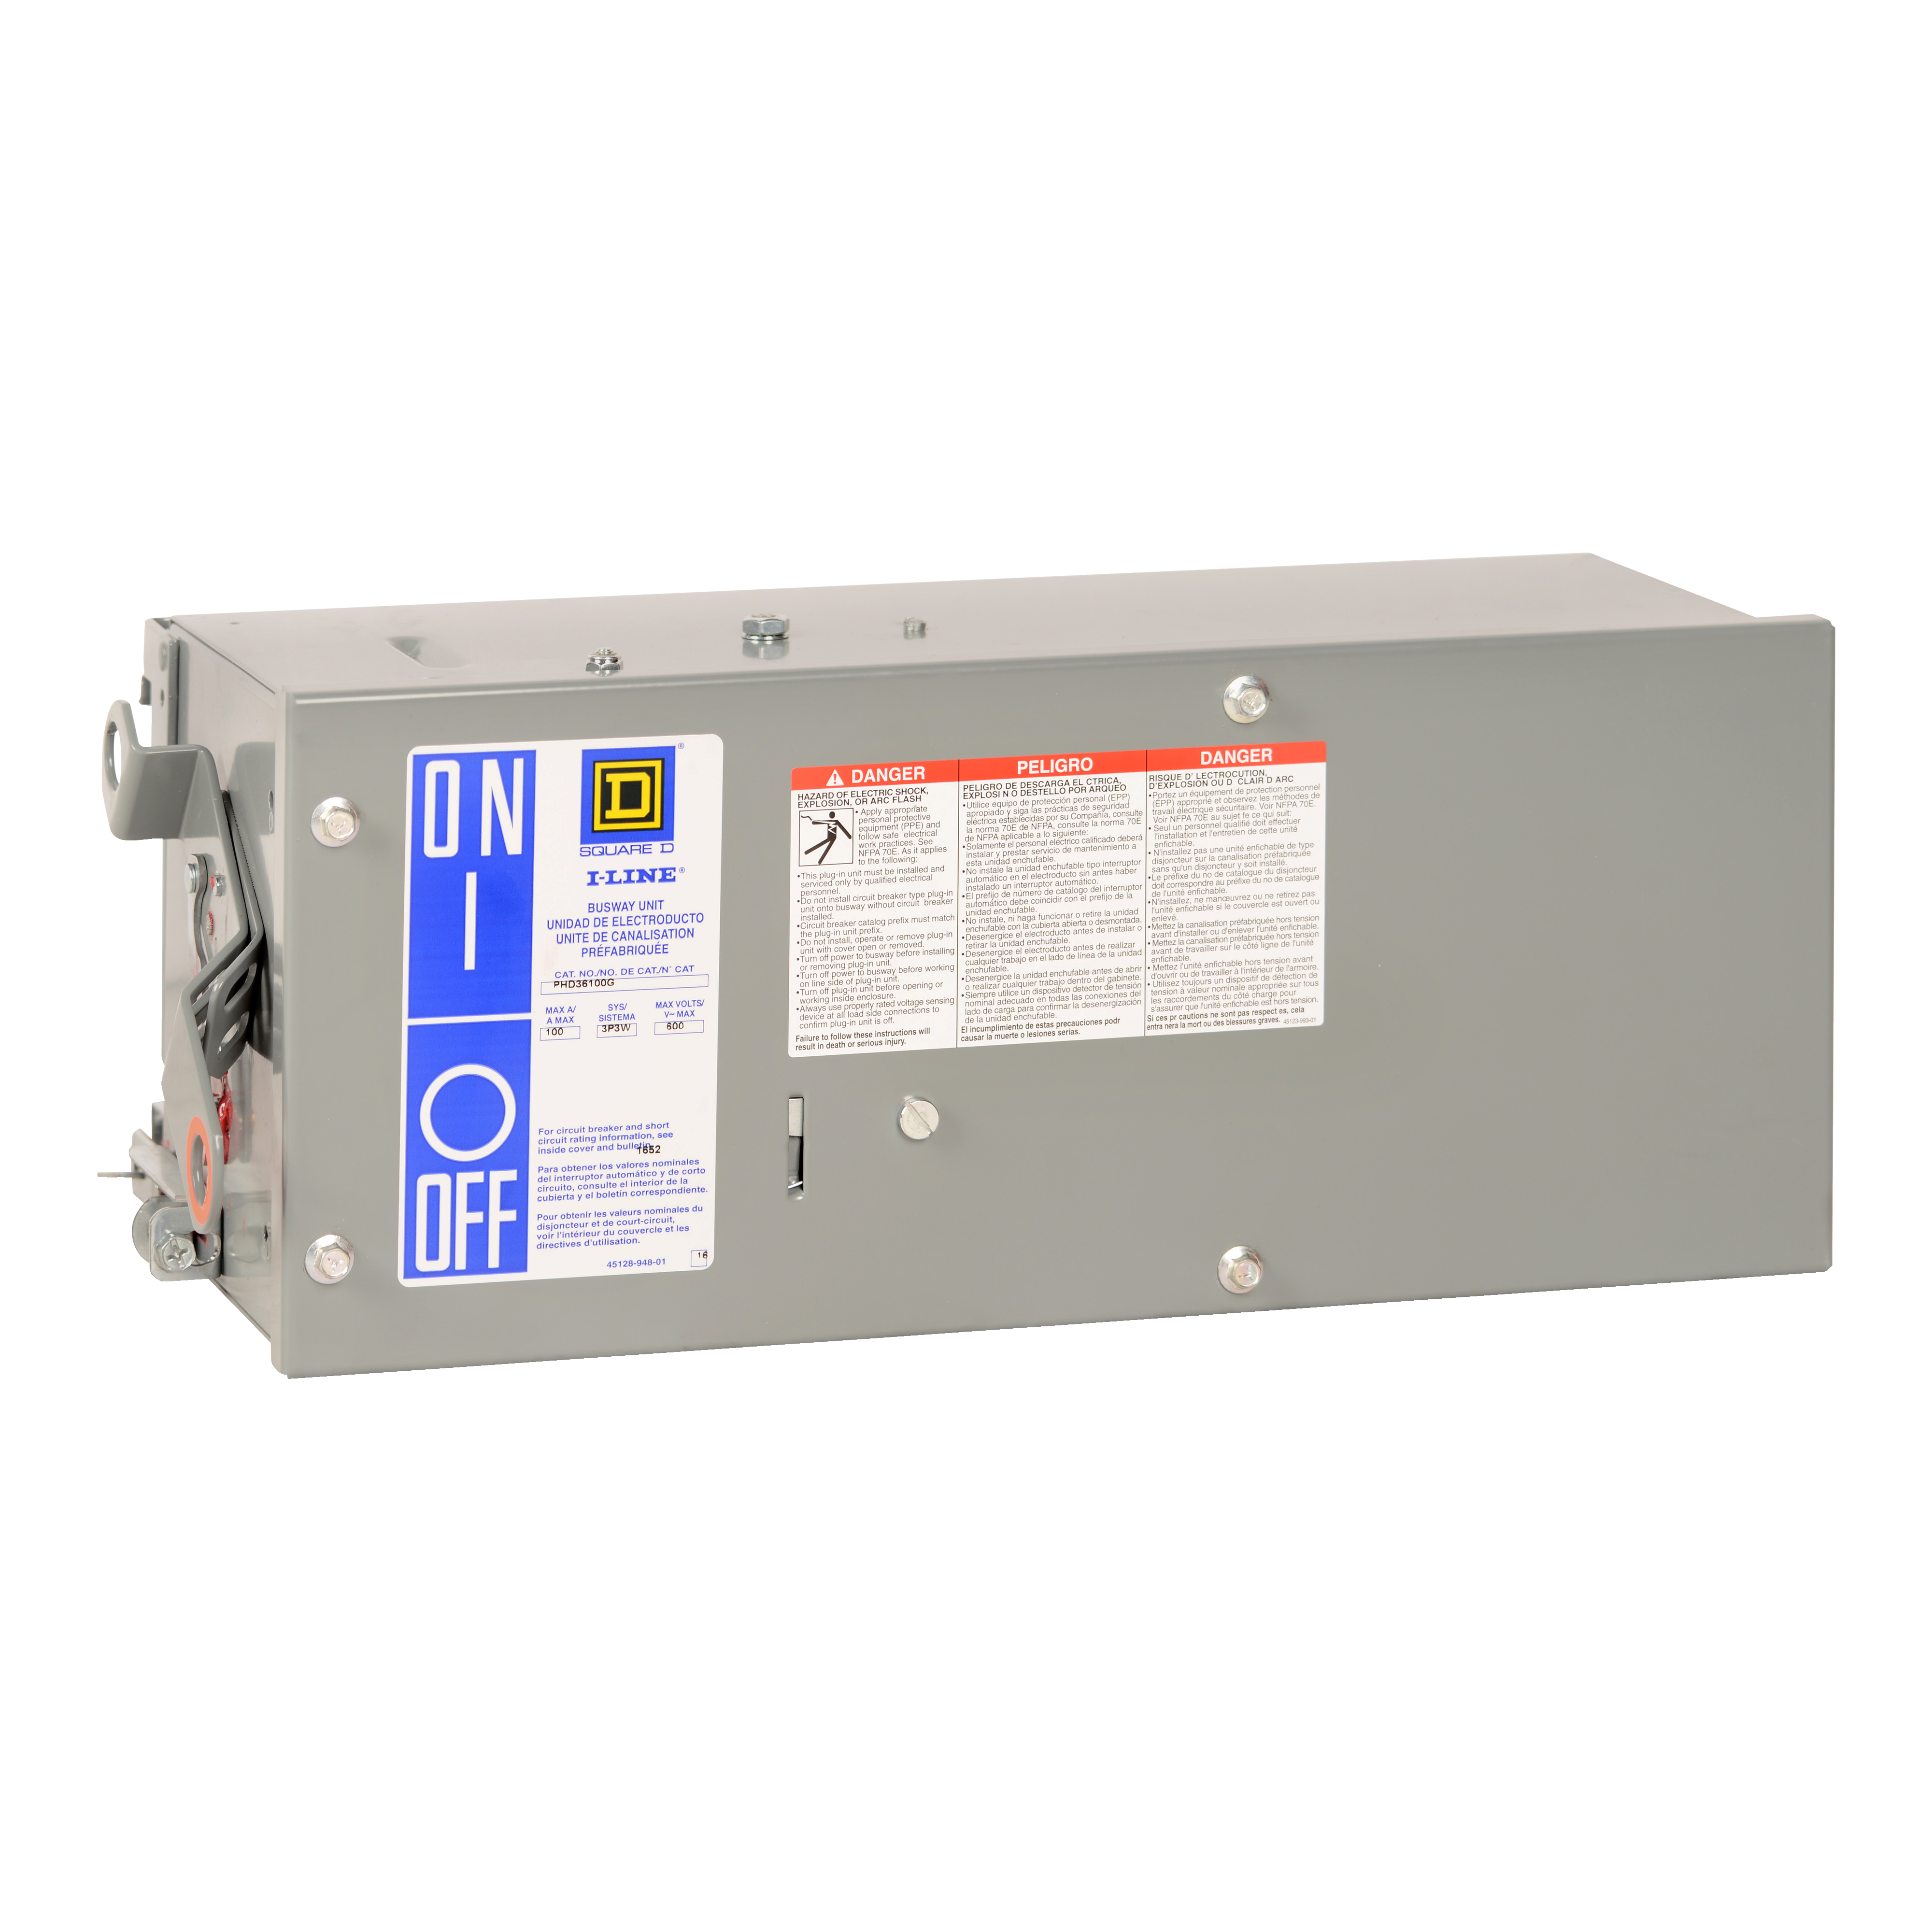 Plug-in unit, I-Line Busway, H-frame, 150A, 3 phase, 3 wire, 600VAC, 25kA, ground